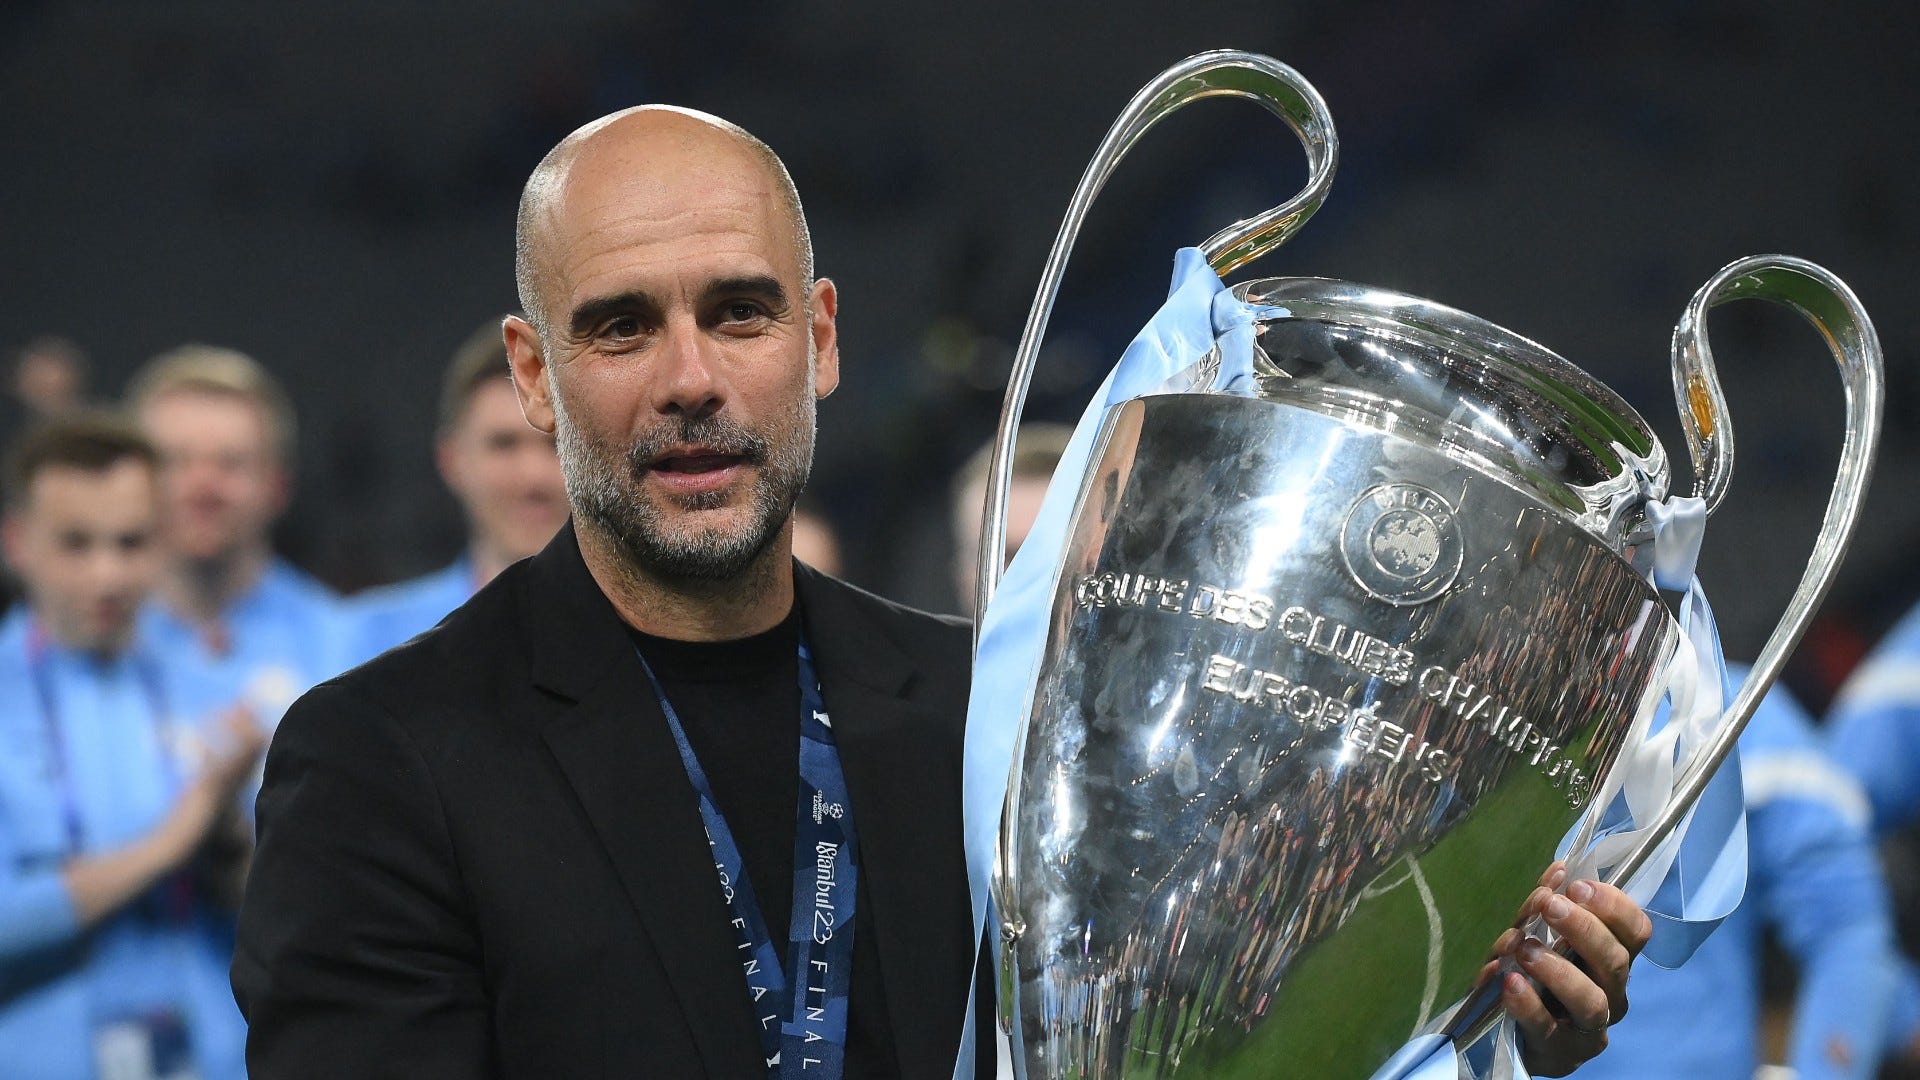 These Guys Are Legends: Pep Guardiola Salutes Manchester City's Champions